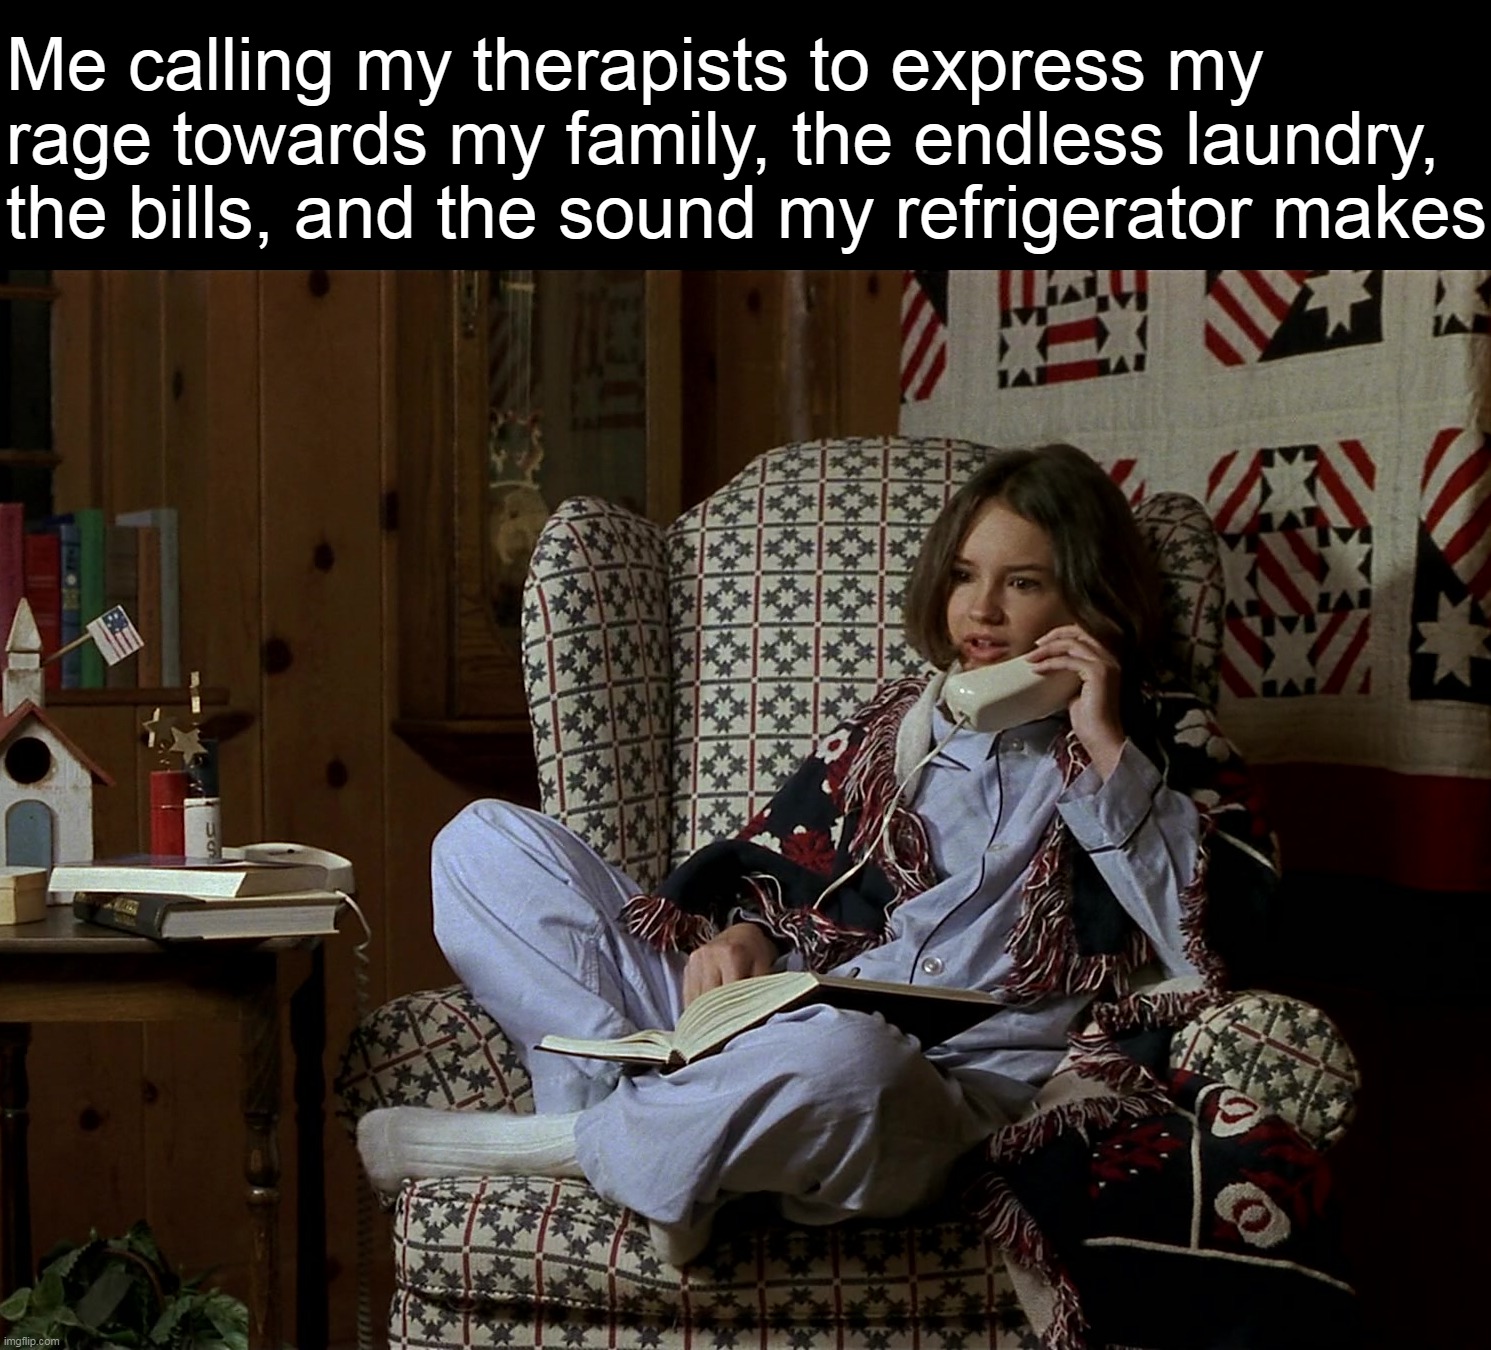 Me calling my therapists to express my rage towards my family, the endless laundry, the bills, and the sound my refrigerator makes | image tagged in meme,memes,humor,funny | made w/ Imgflip meme maker